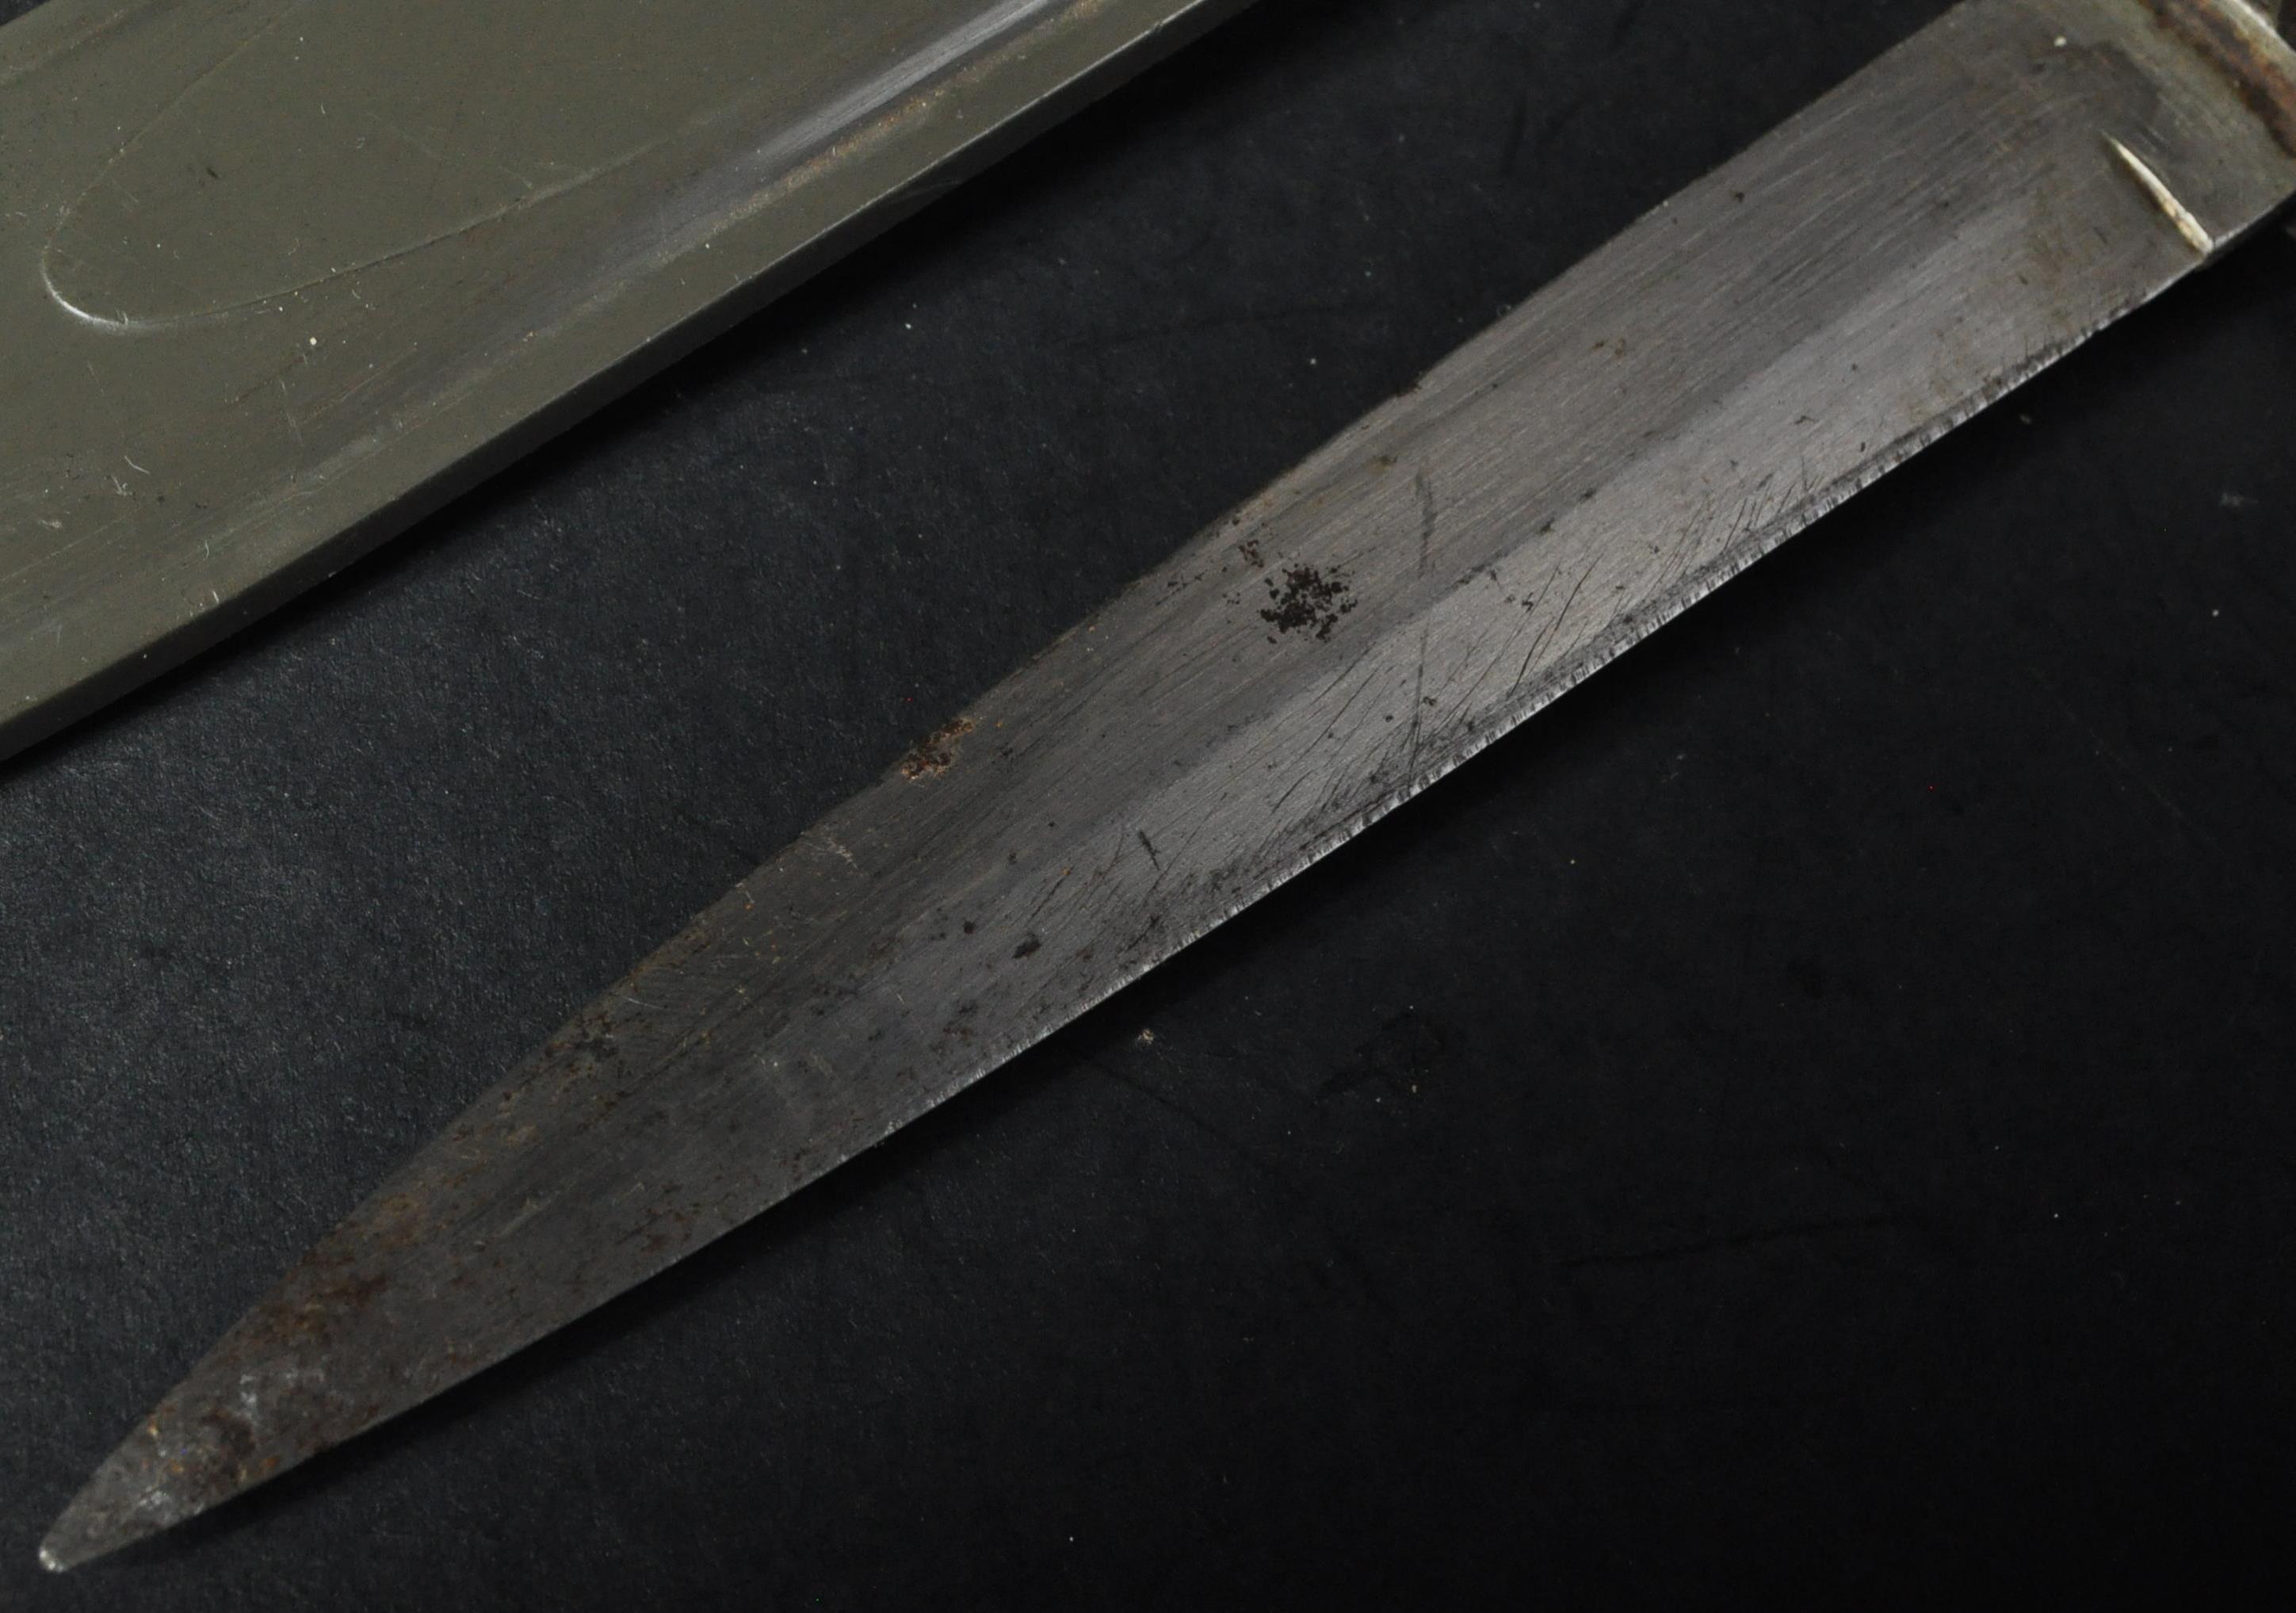 WWII SECOND WORLD WAR PERIOD FIGHTING KNIFE - Image 2 of 6